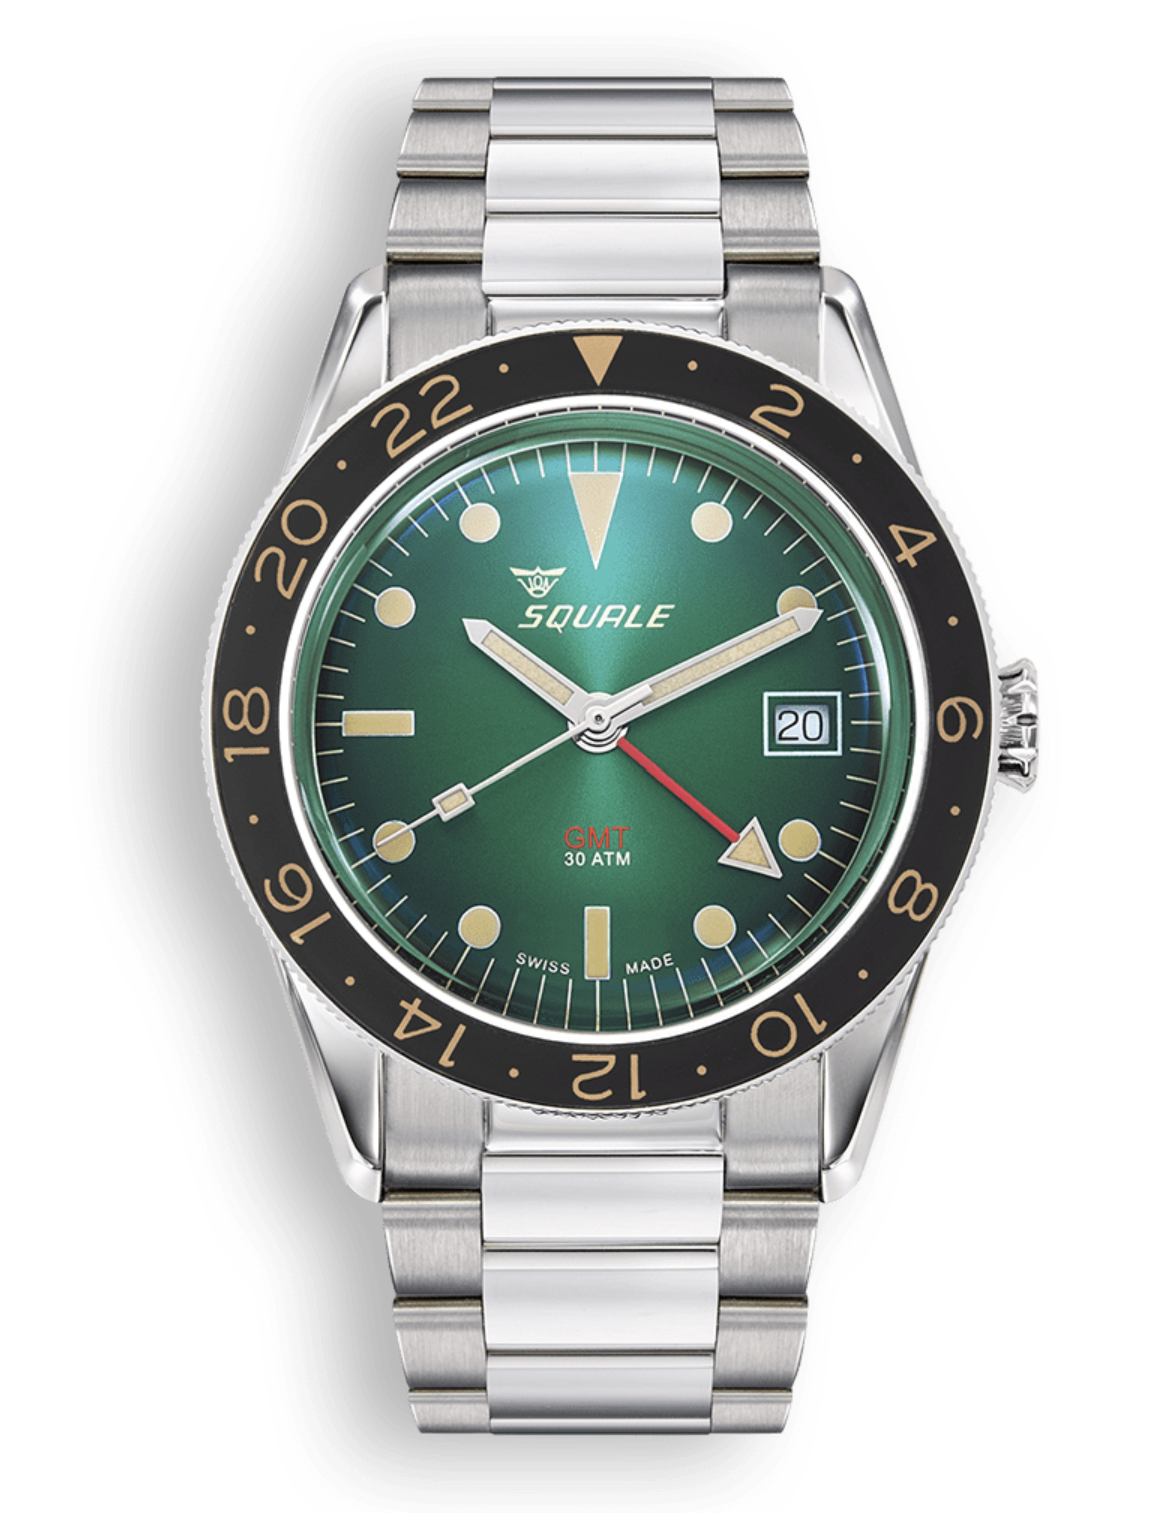 SQUALE SUB-39 GMT VINTAGE GREEN